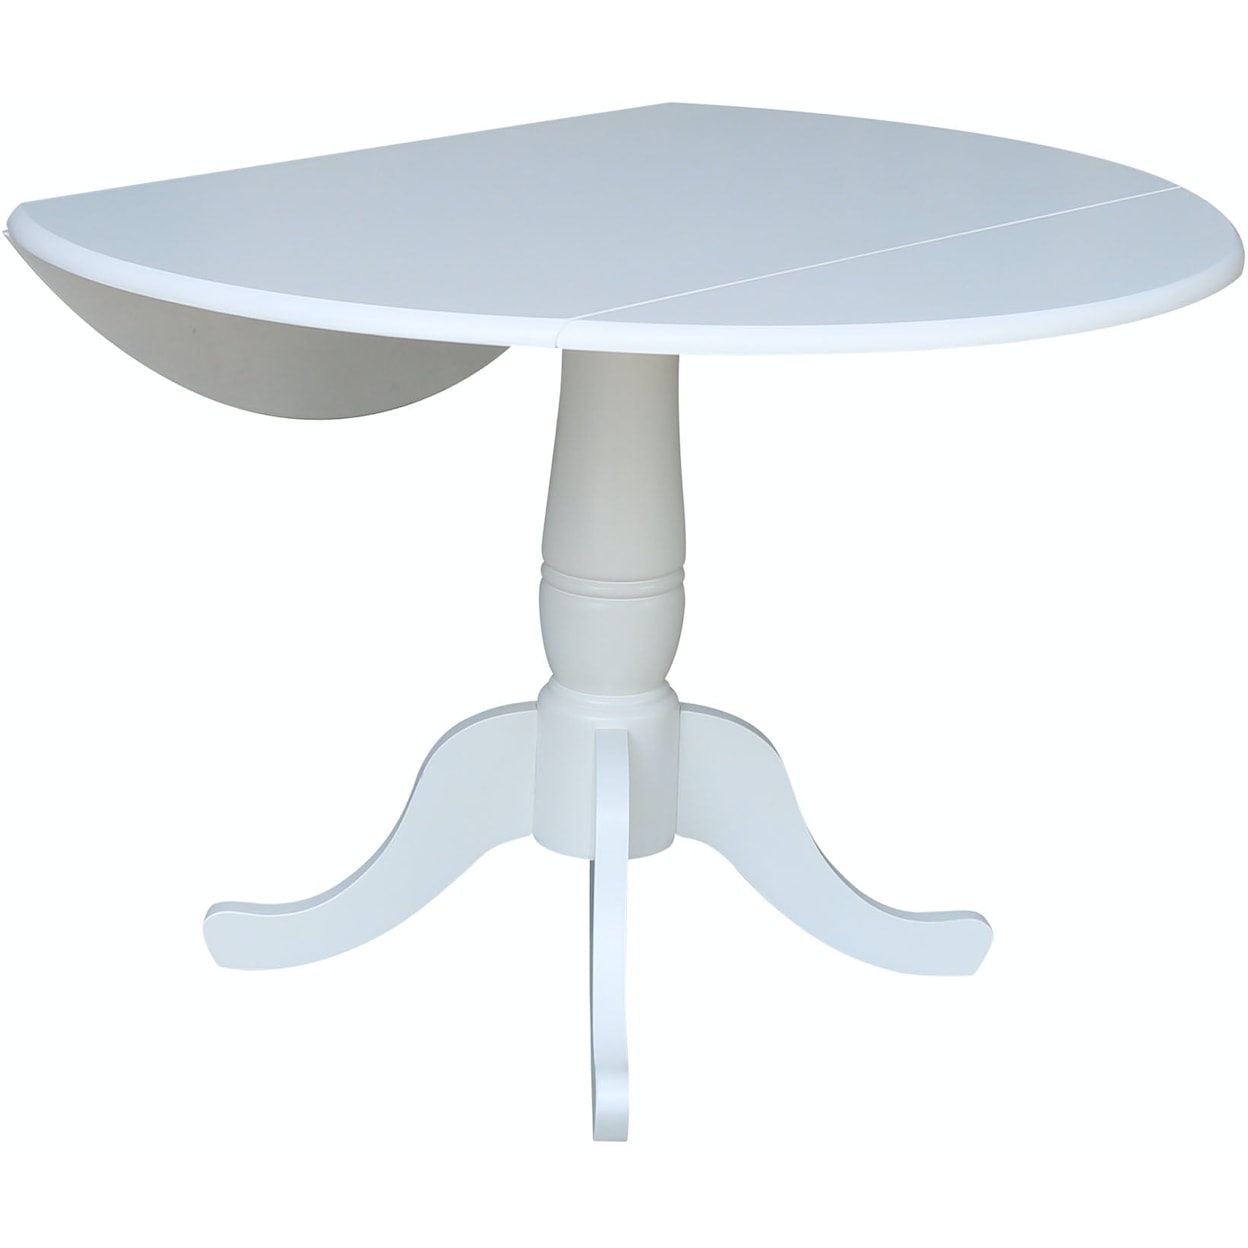 John Thomas Dining Essentials Round Dropleaf Pedestal Table in Pure White